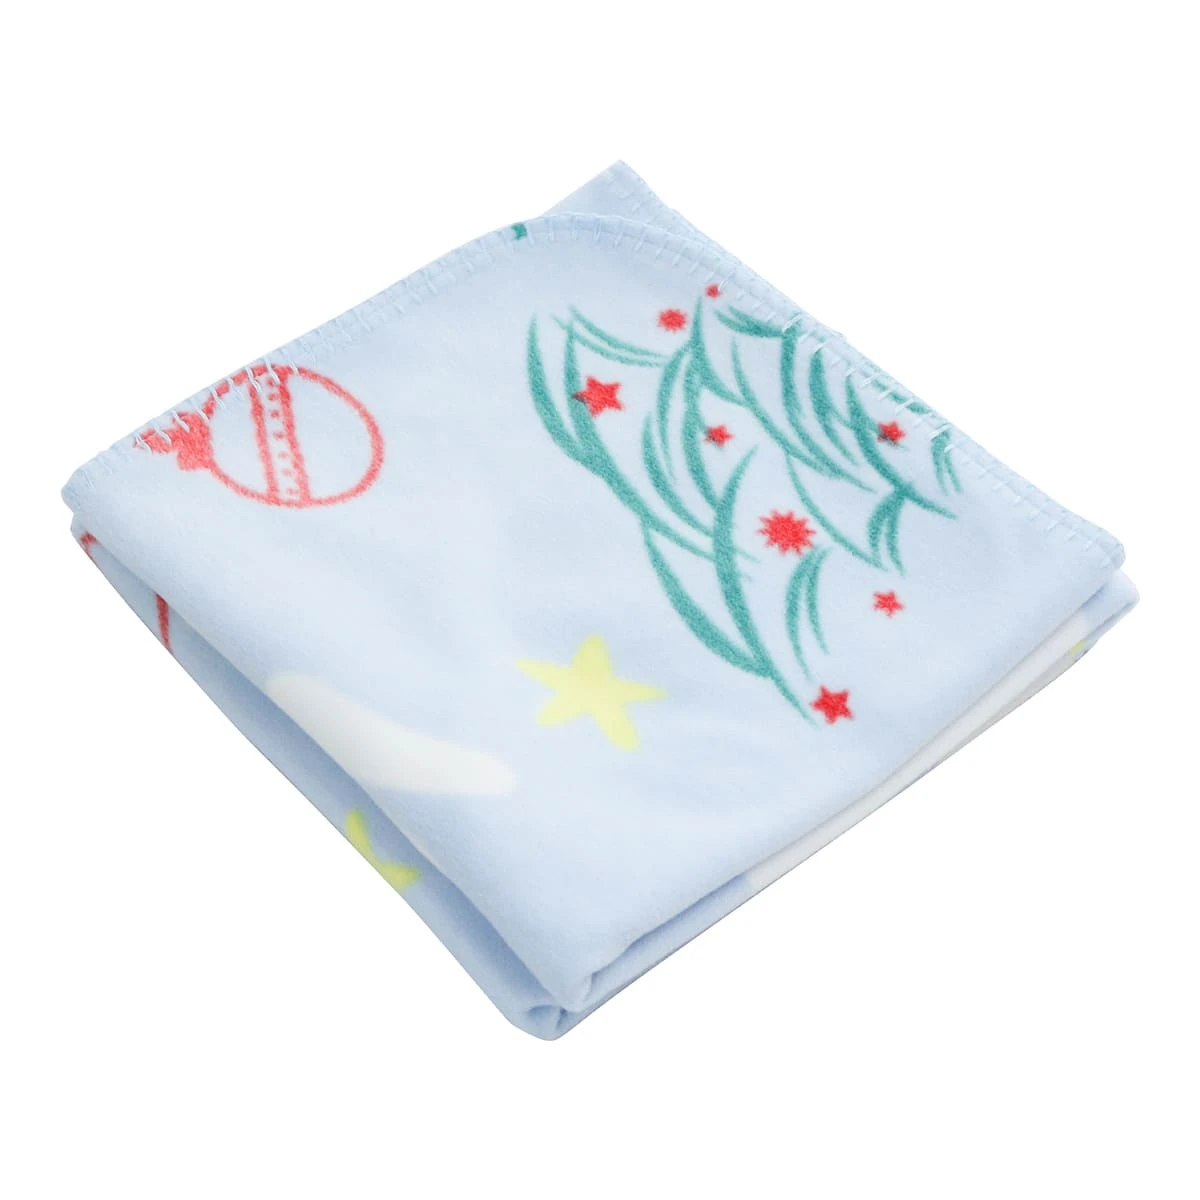 Angel Snow Printed Fleece Baby Blanket with T-stitch Edging (Blue)